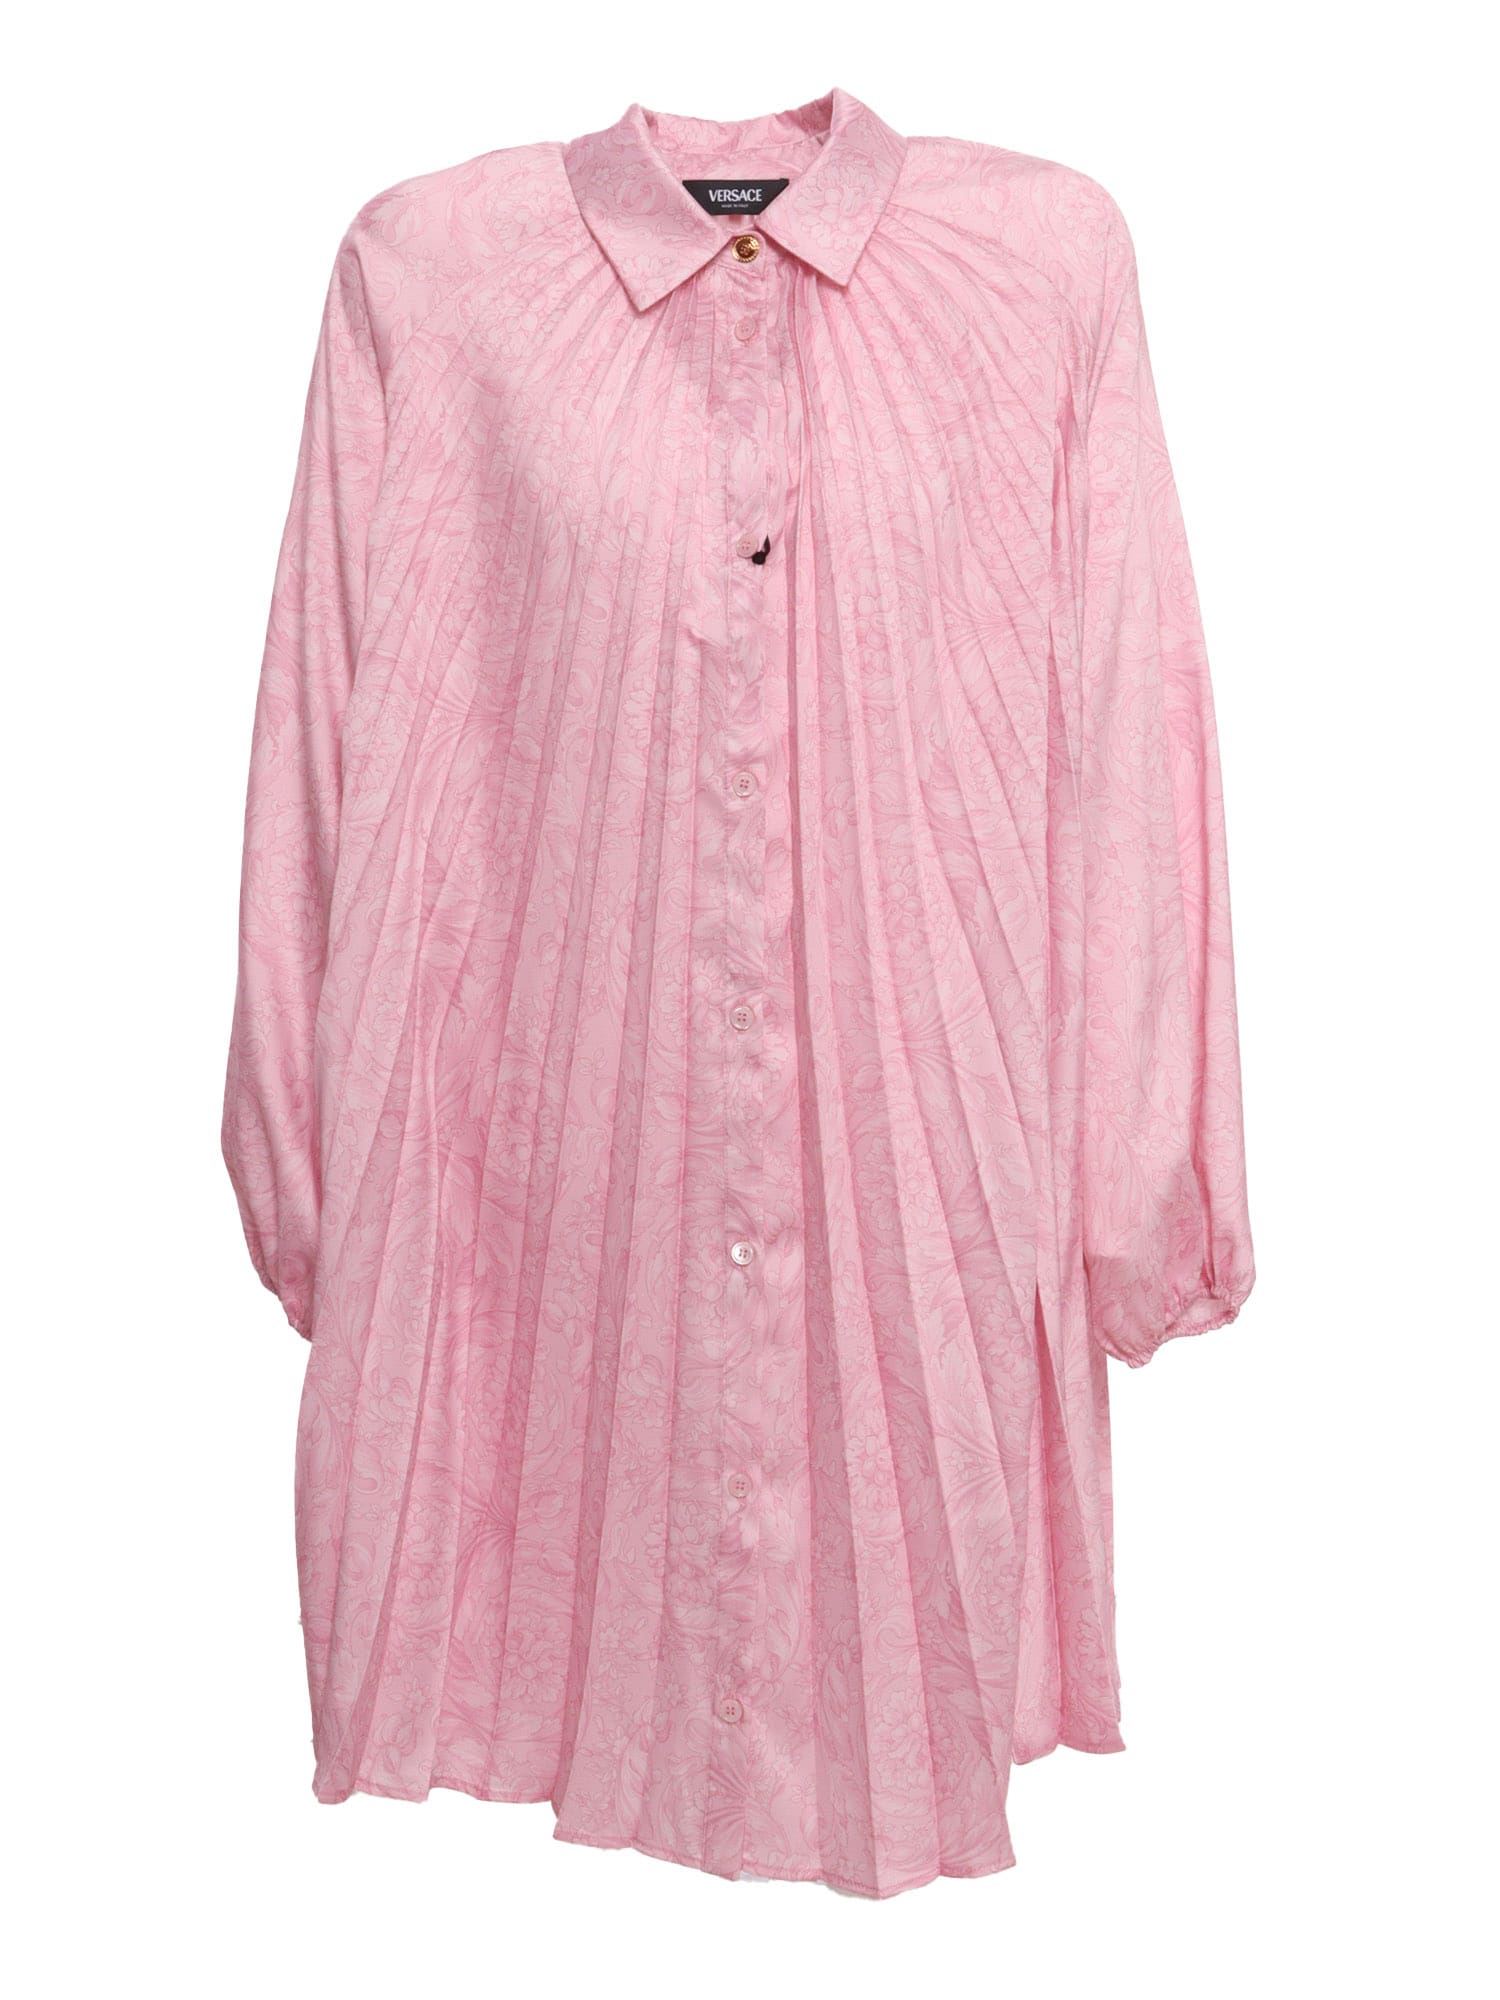 Versace Pink Baroque Style Shirt